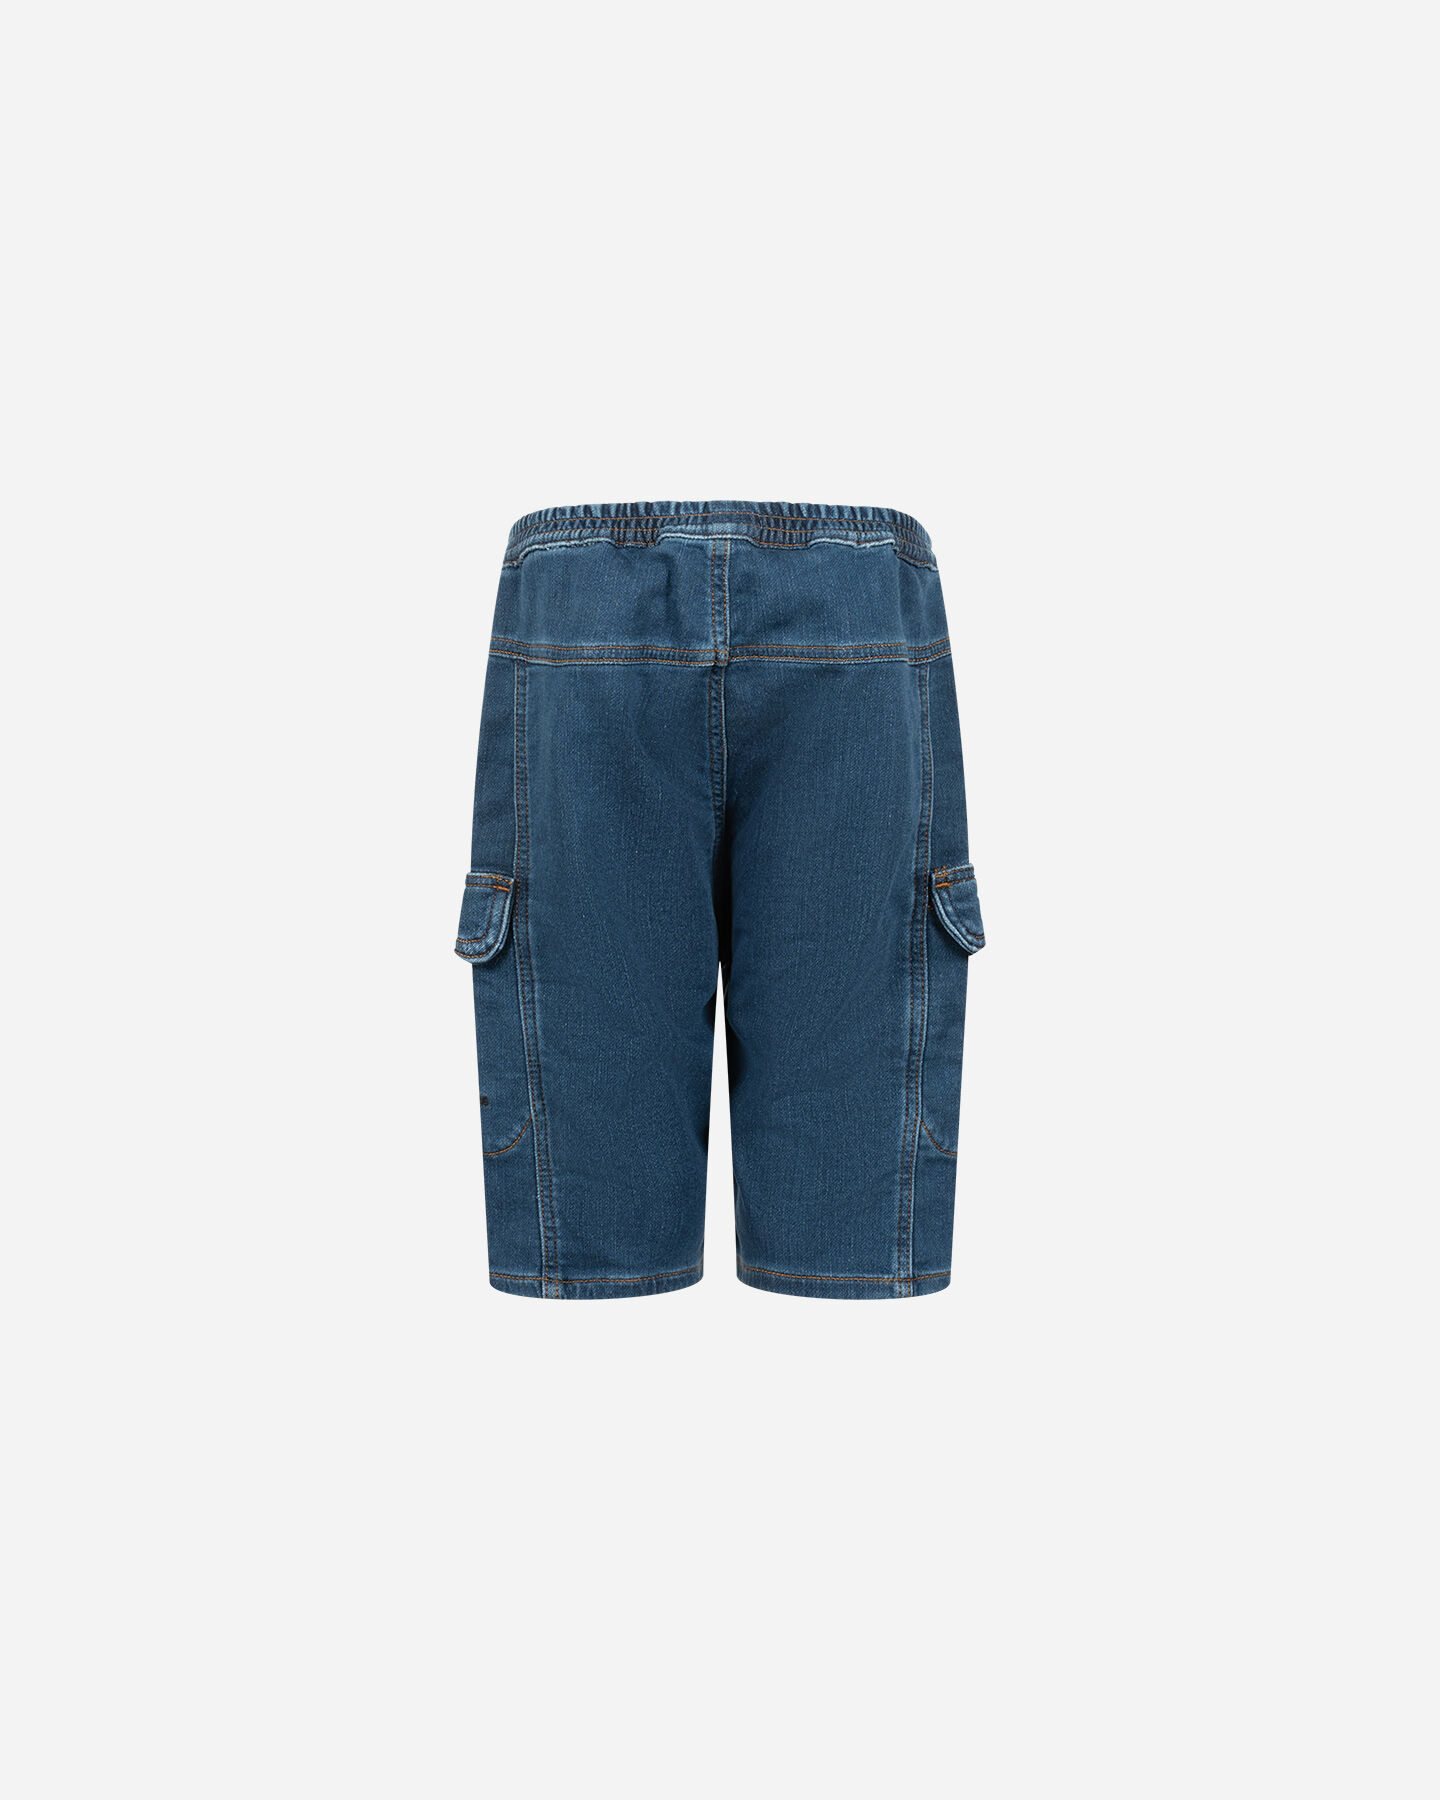  Pantalone CALVIN KLEIN JEANS DAD ICONIC JR S4131538|Iconic Mid|10 scatto 1